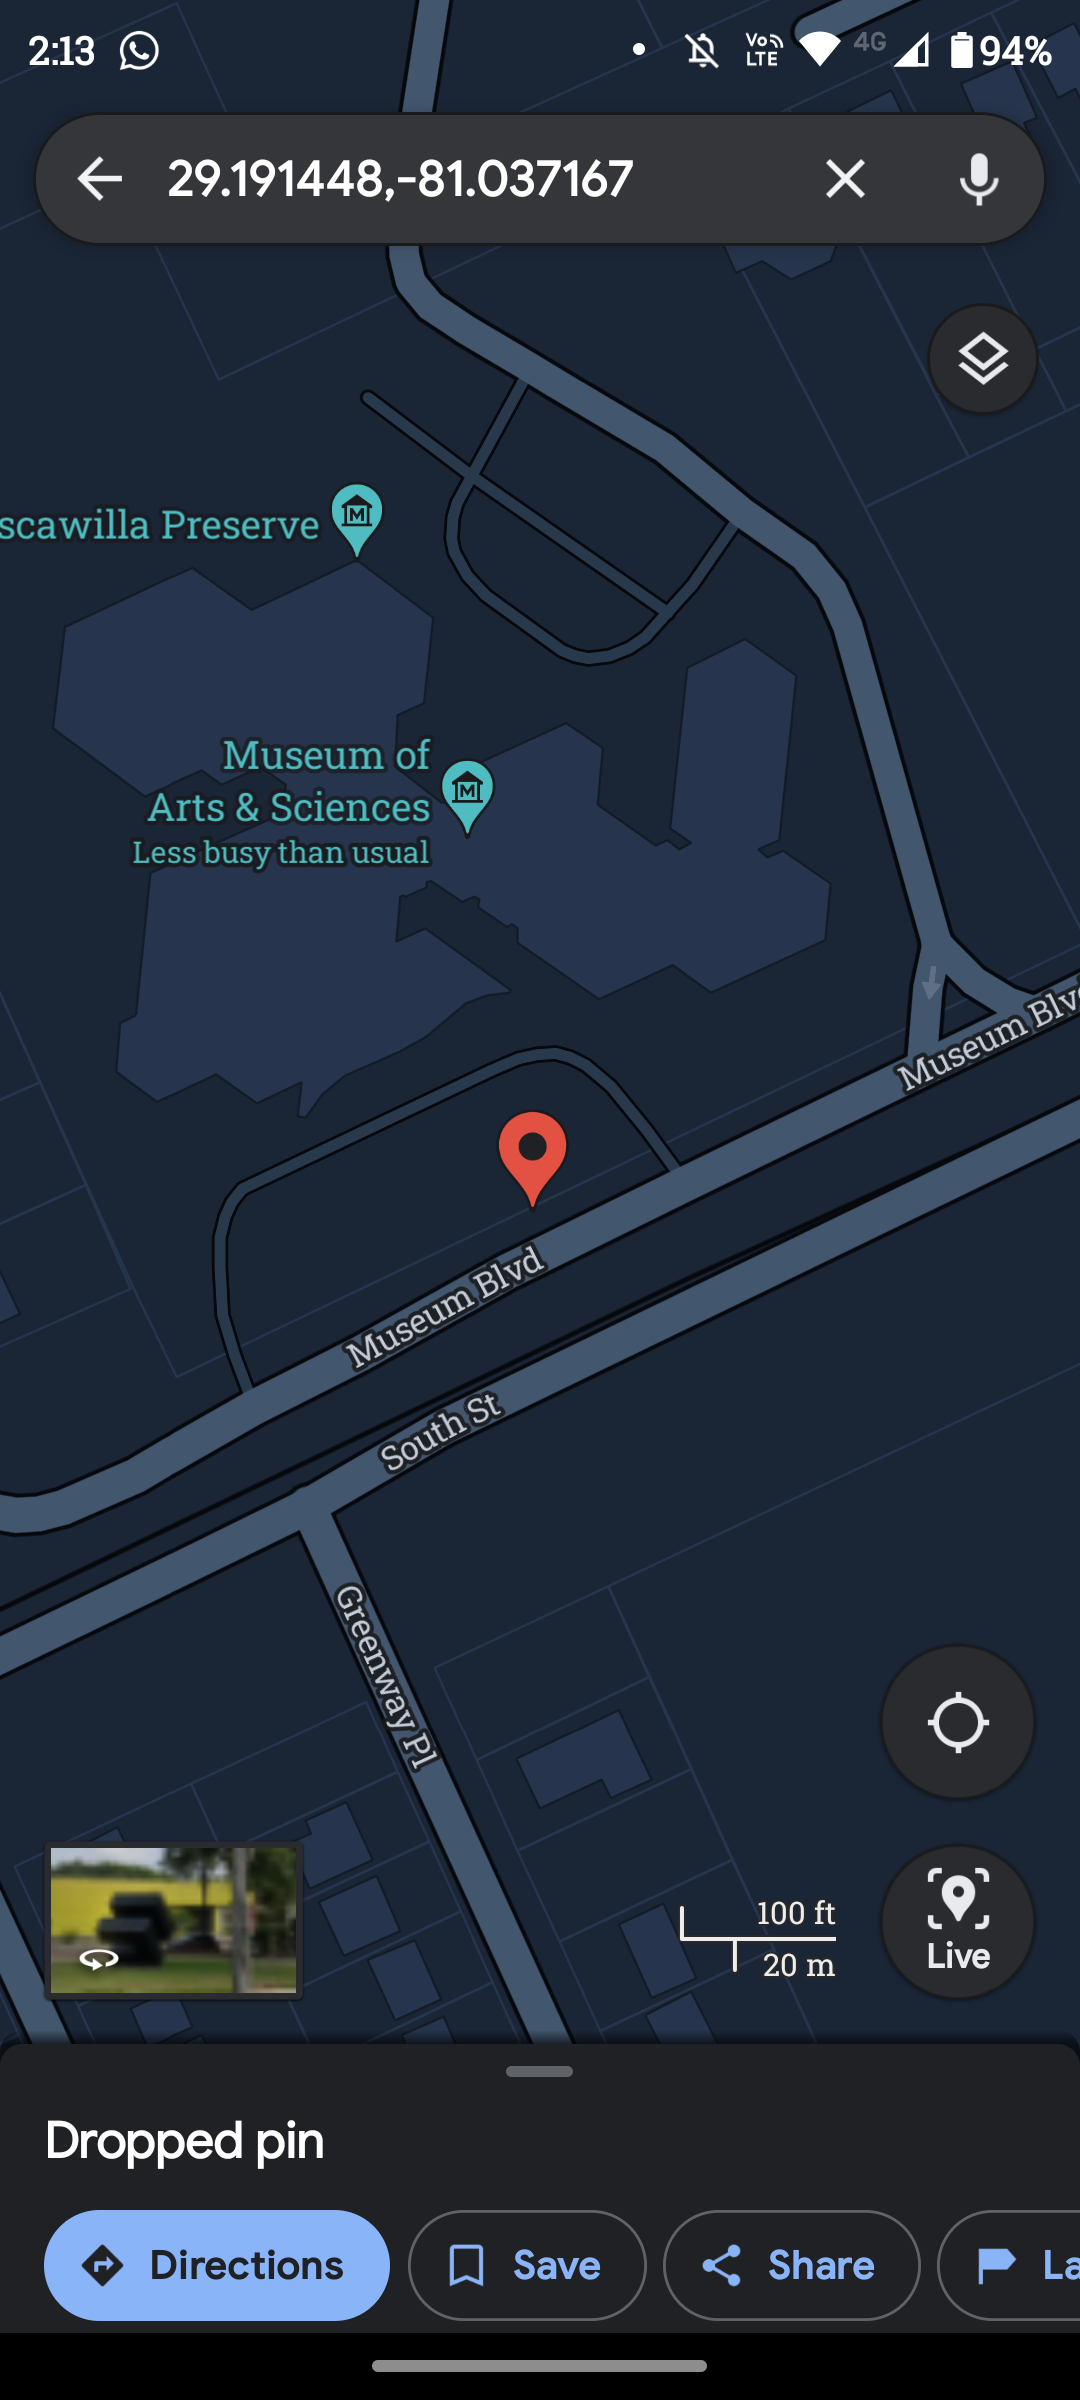 Pin dropped in Google Maps app